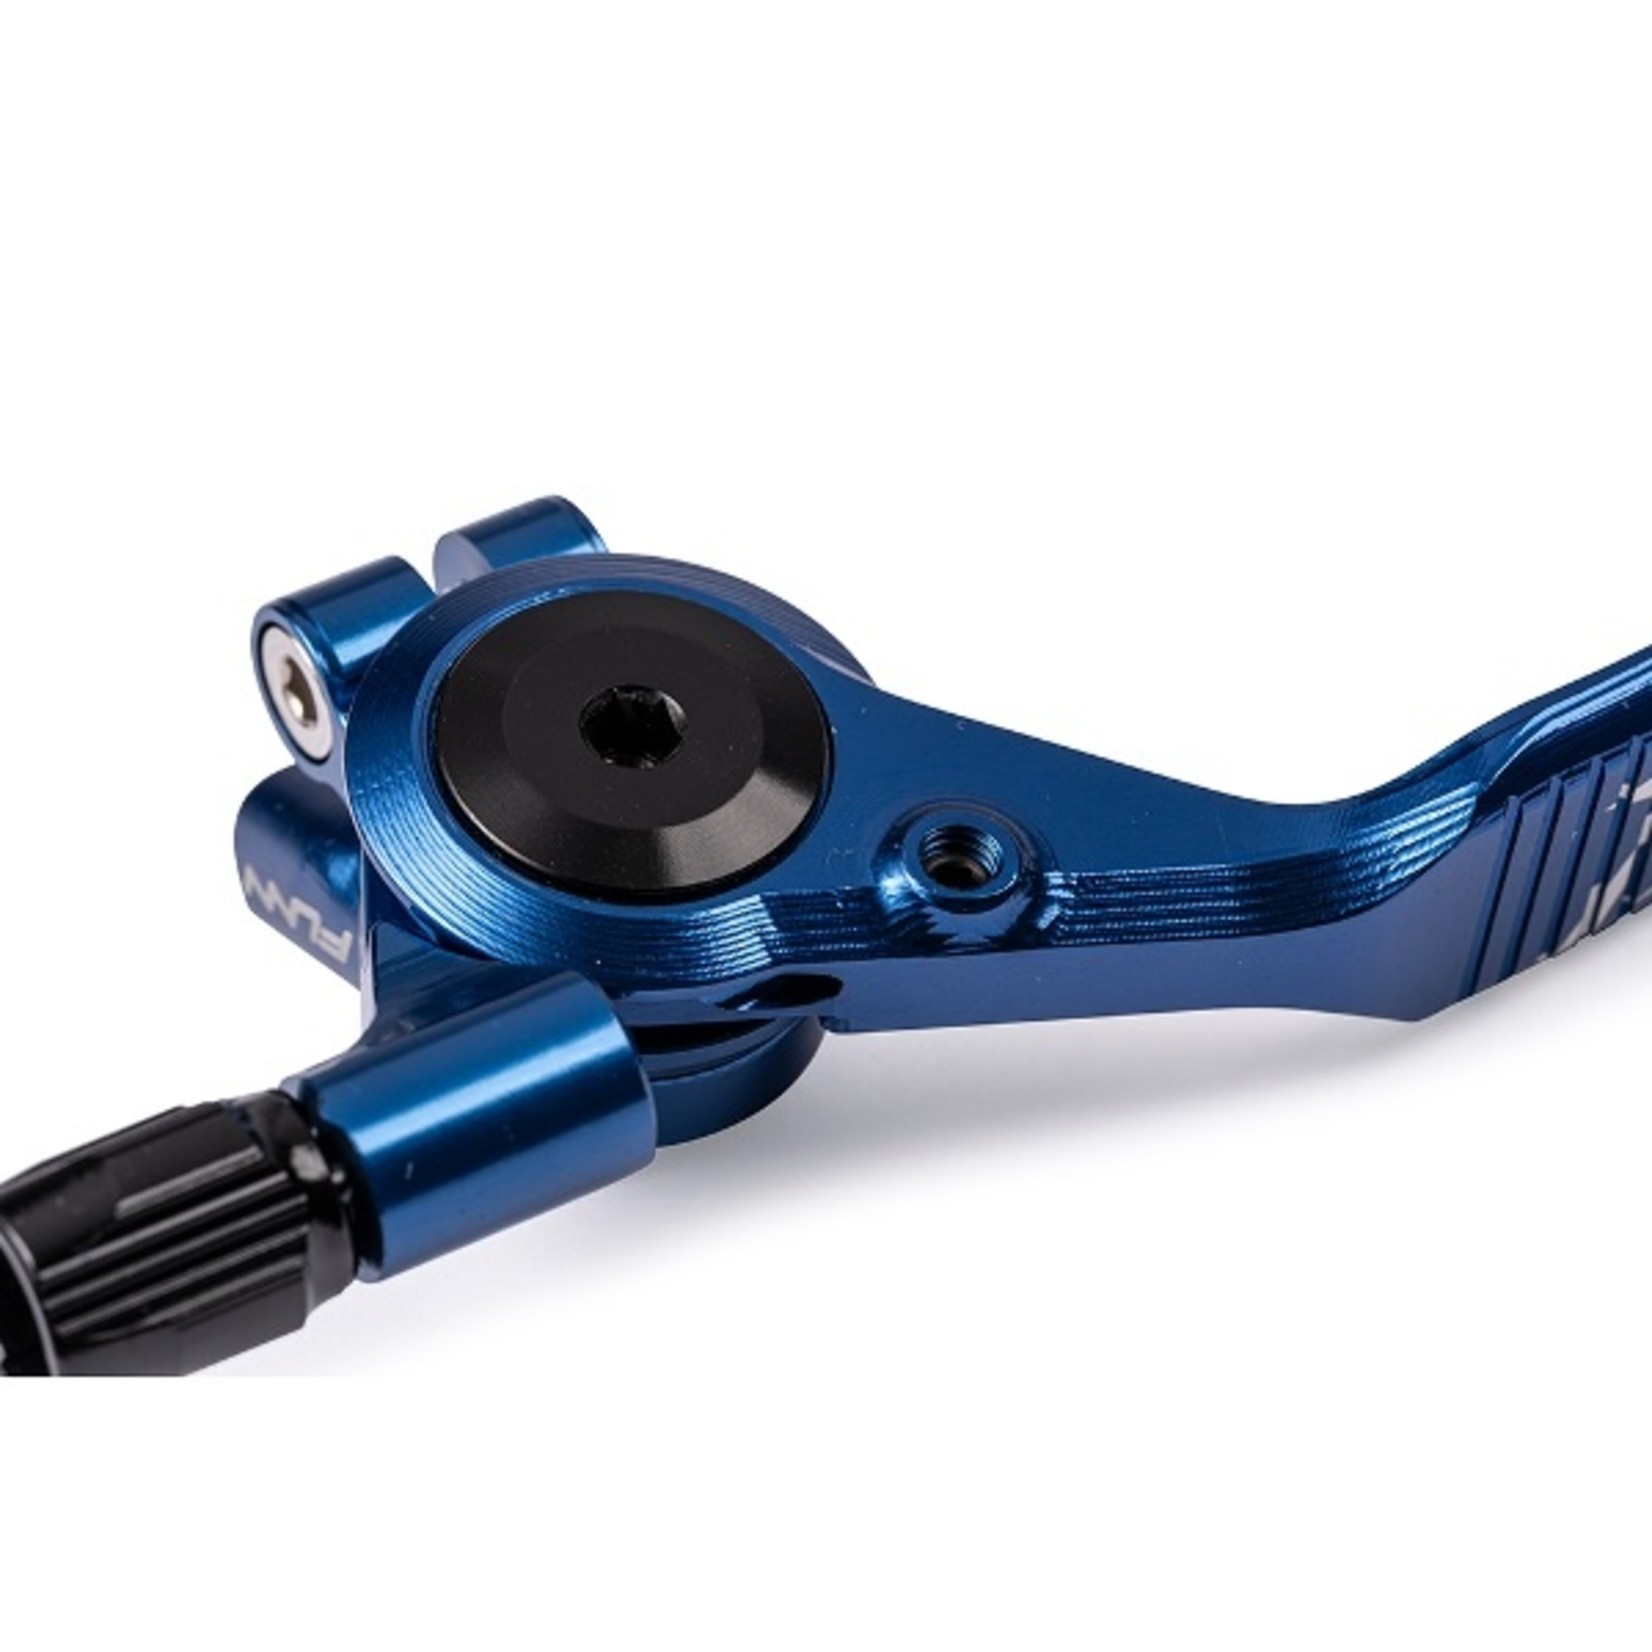 FUNN Funn Remote Updown Lever - Fits Exterrnal & Internal Routing Droppers AL6061 - Blue